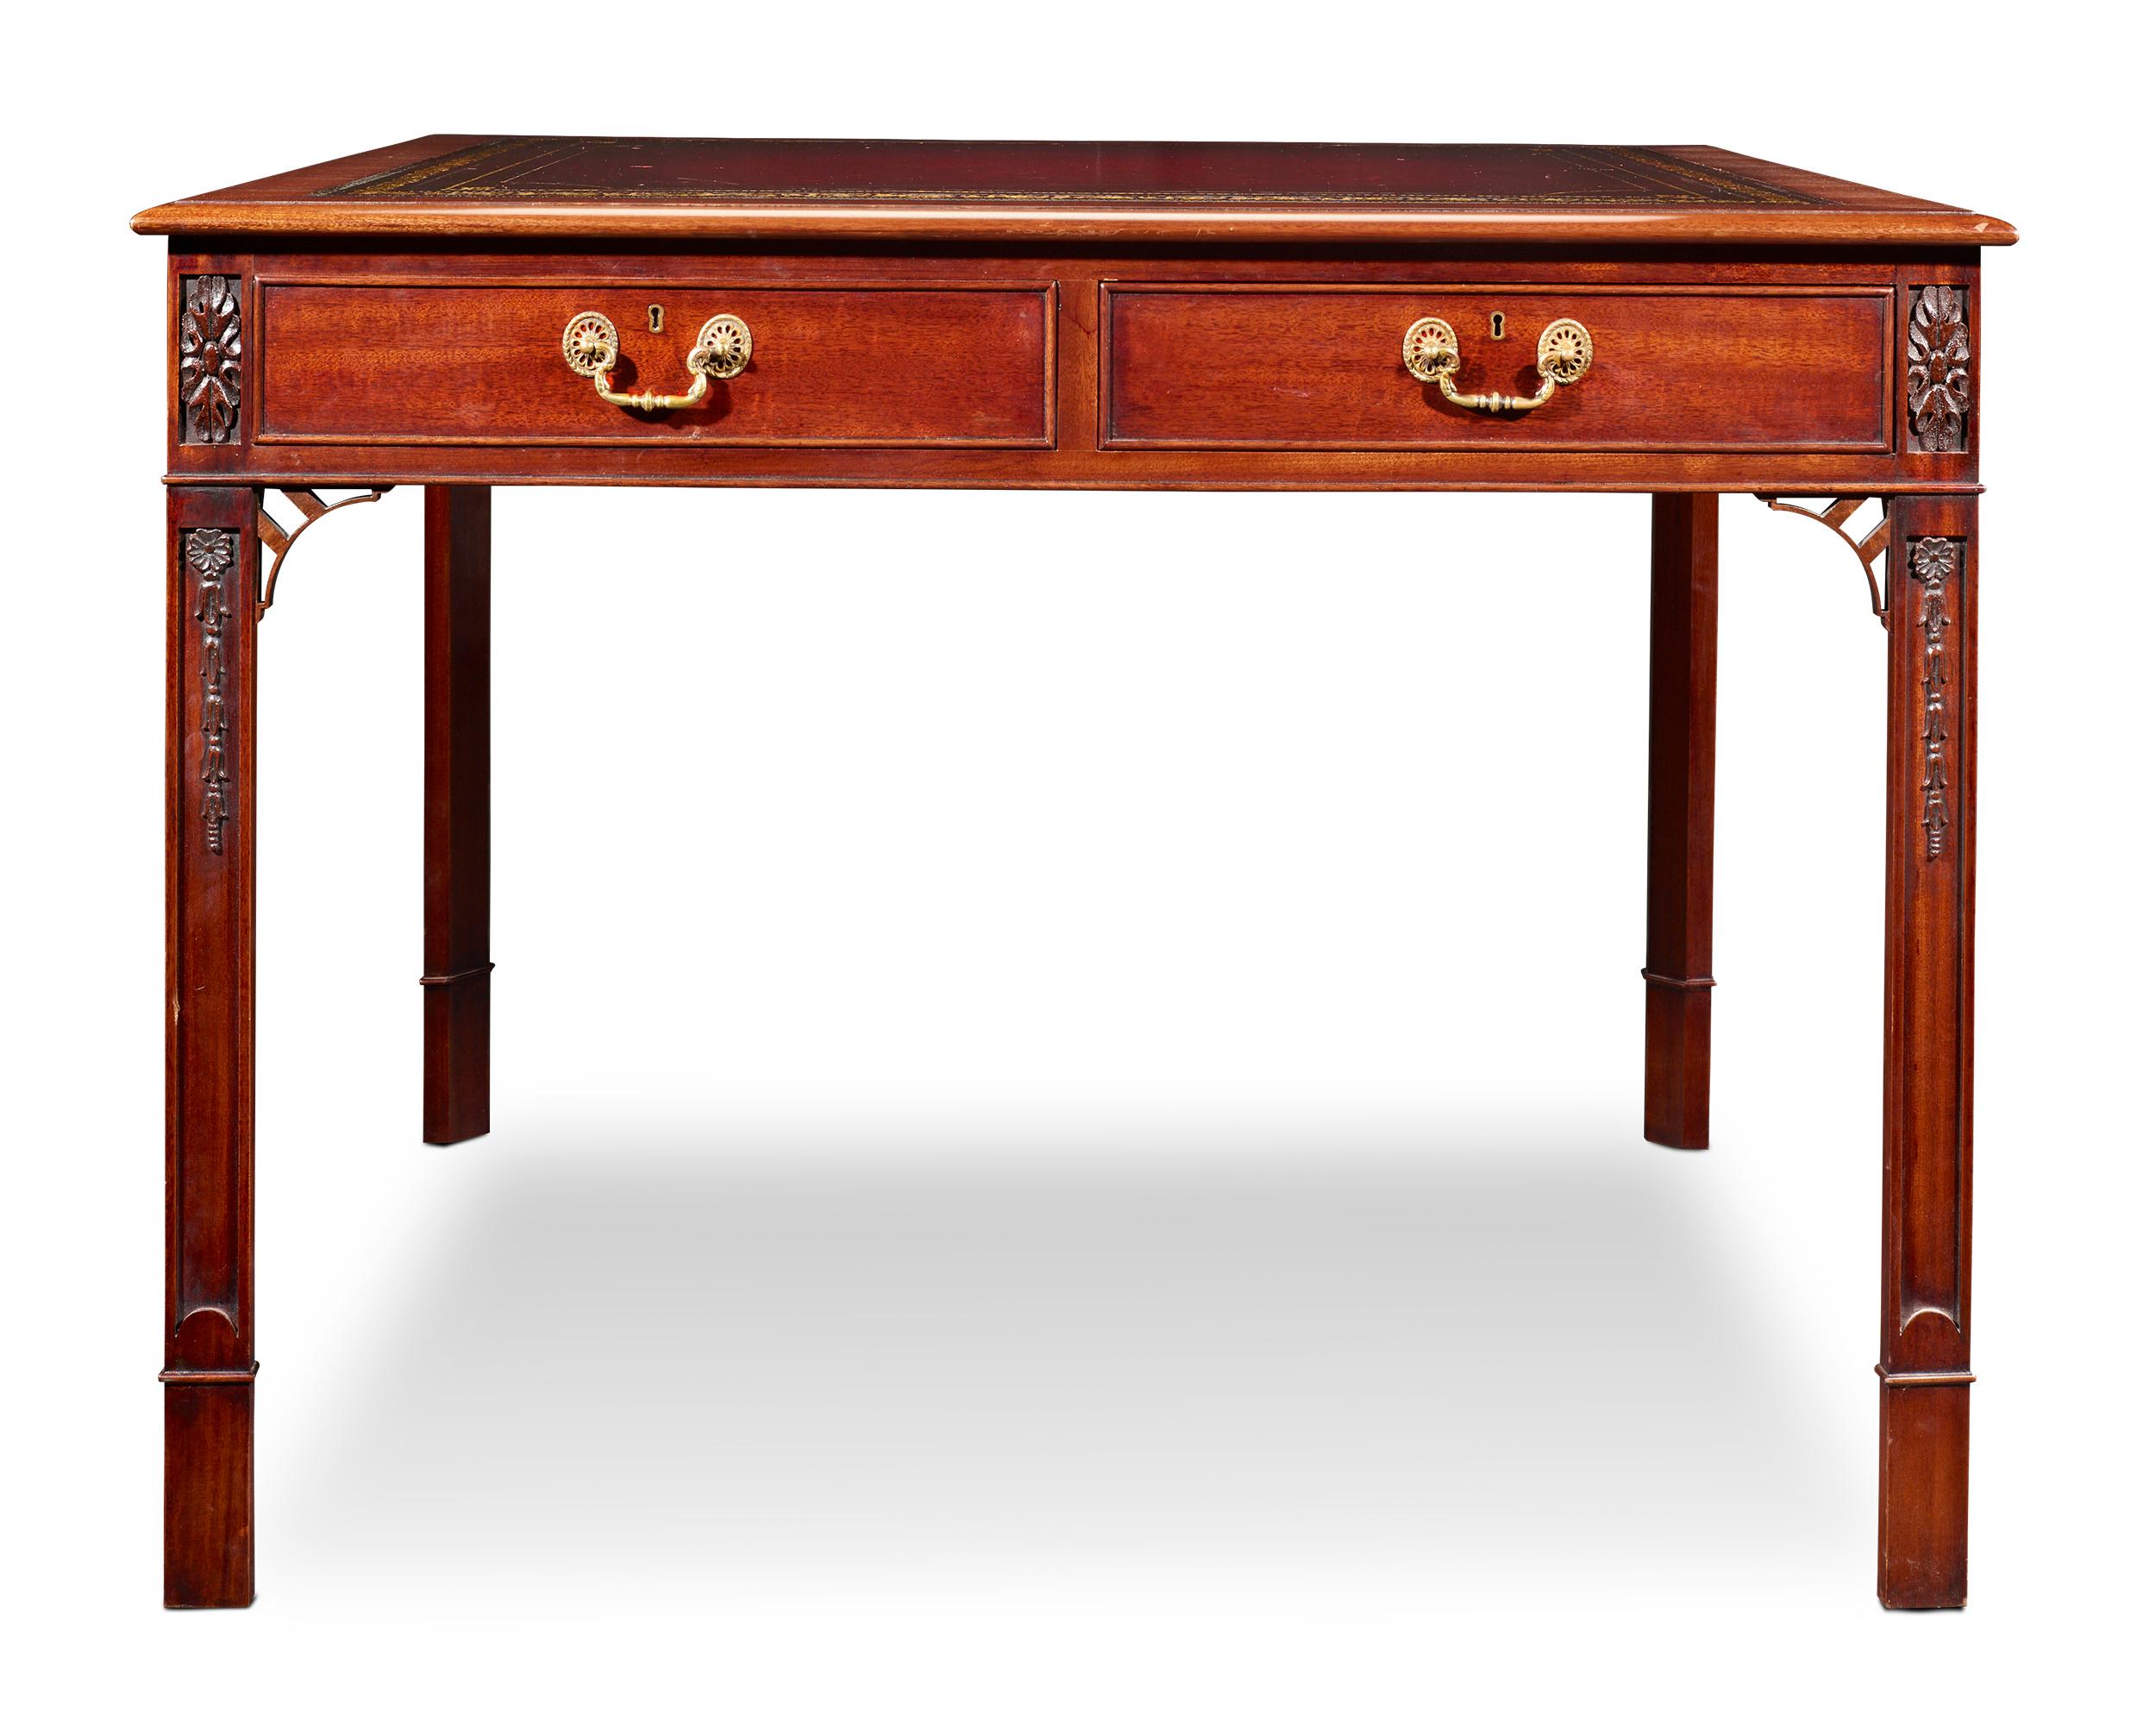 English Regency-Style Mahogany Leather-Topped Table For Sale